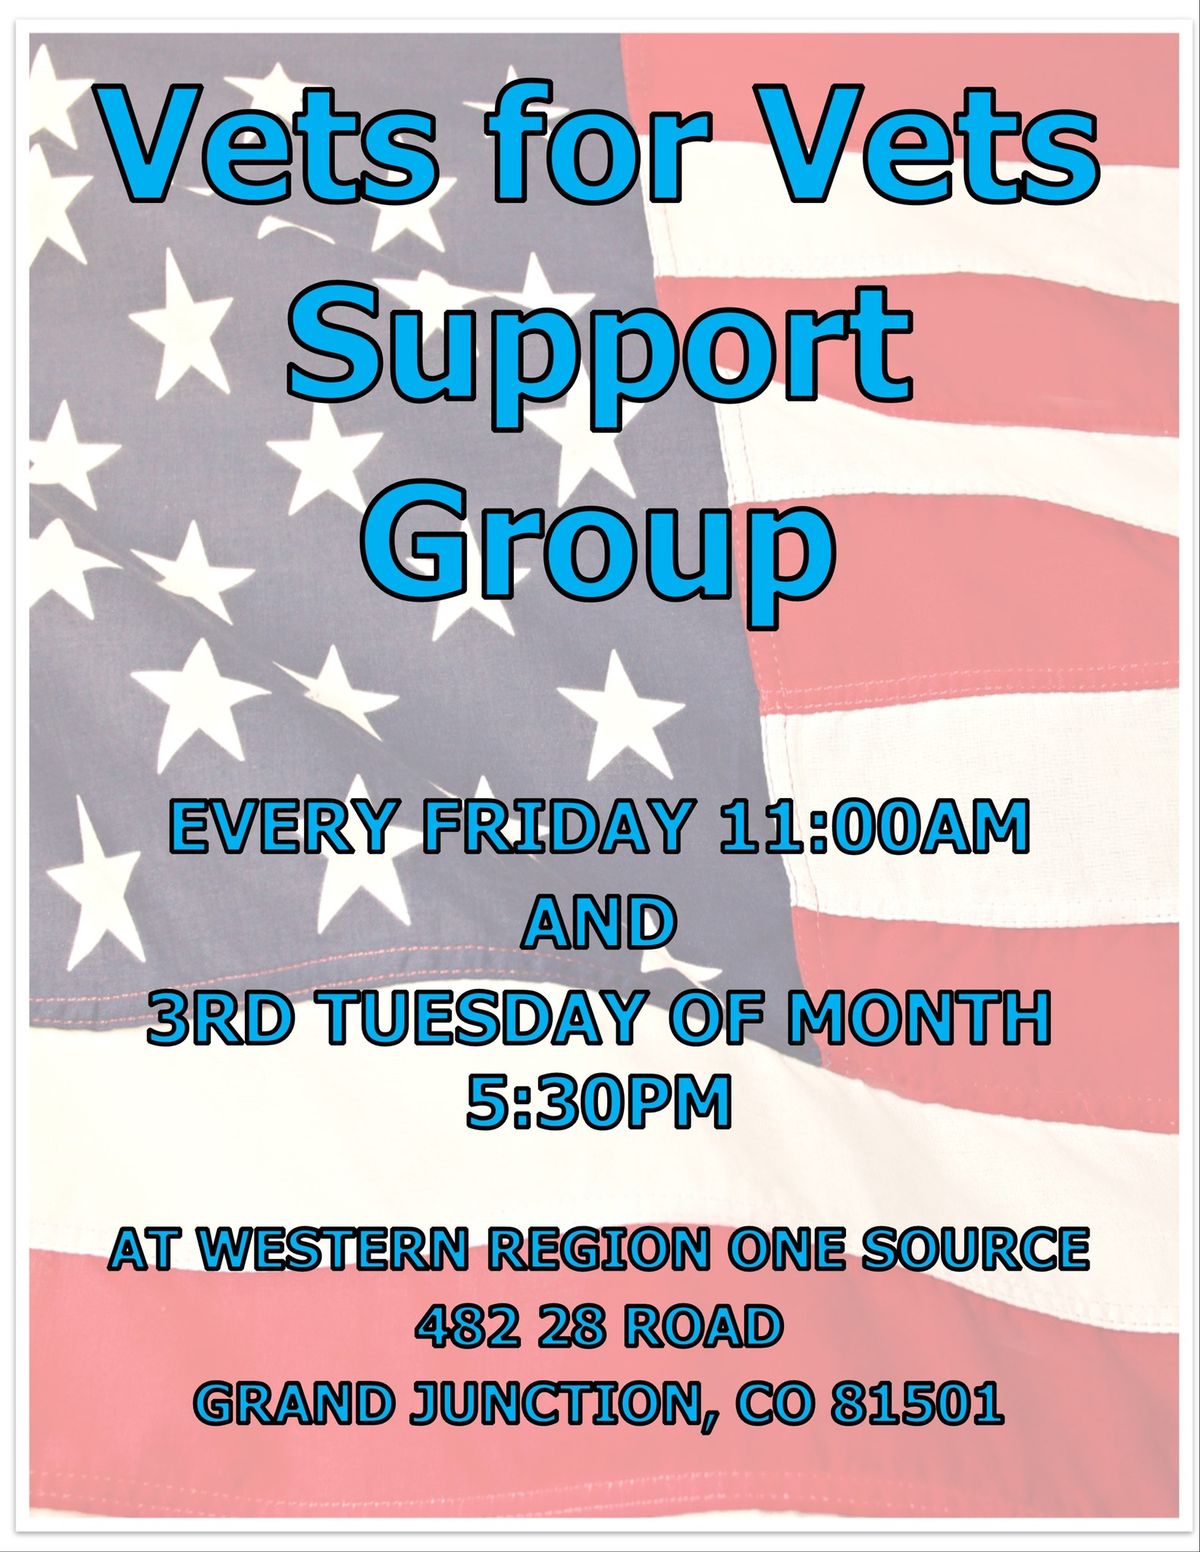 Vets for Vets Support Group 